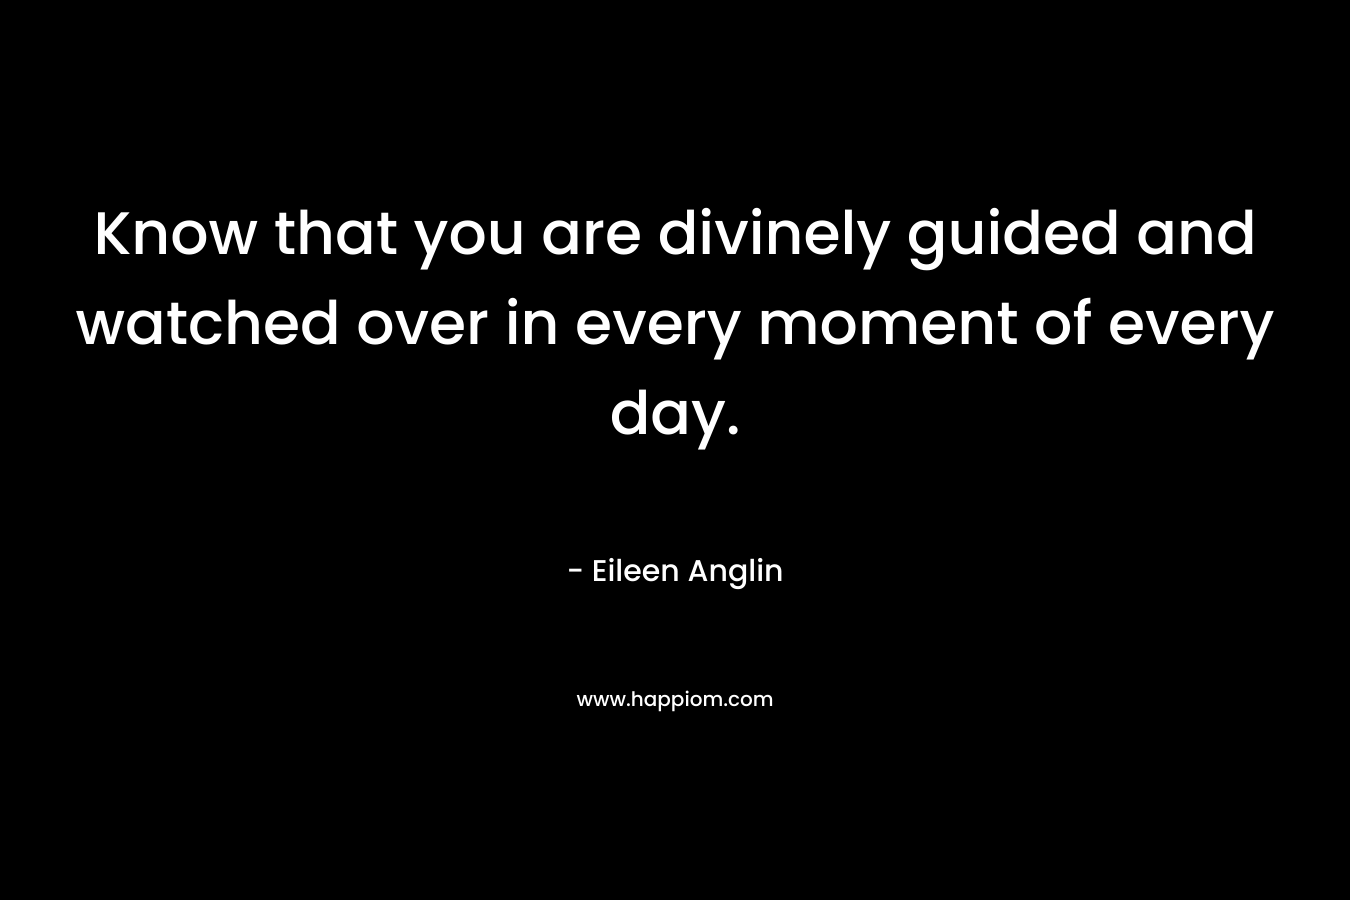 Know that you are divinely guided and watched over in every moment of every day. – Eileen Anglin